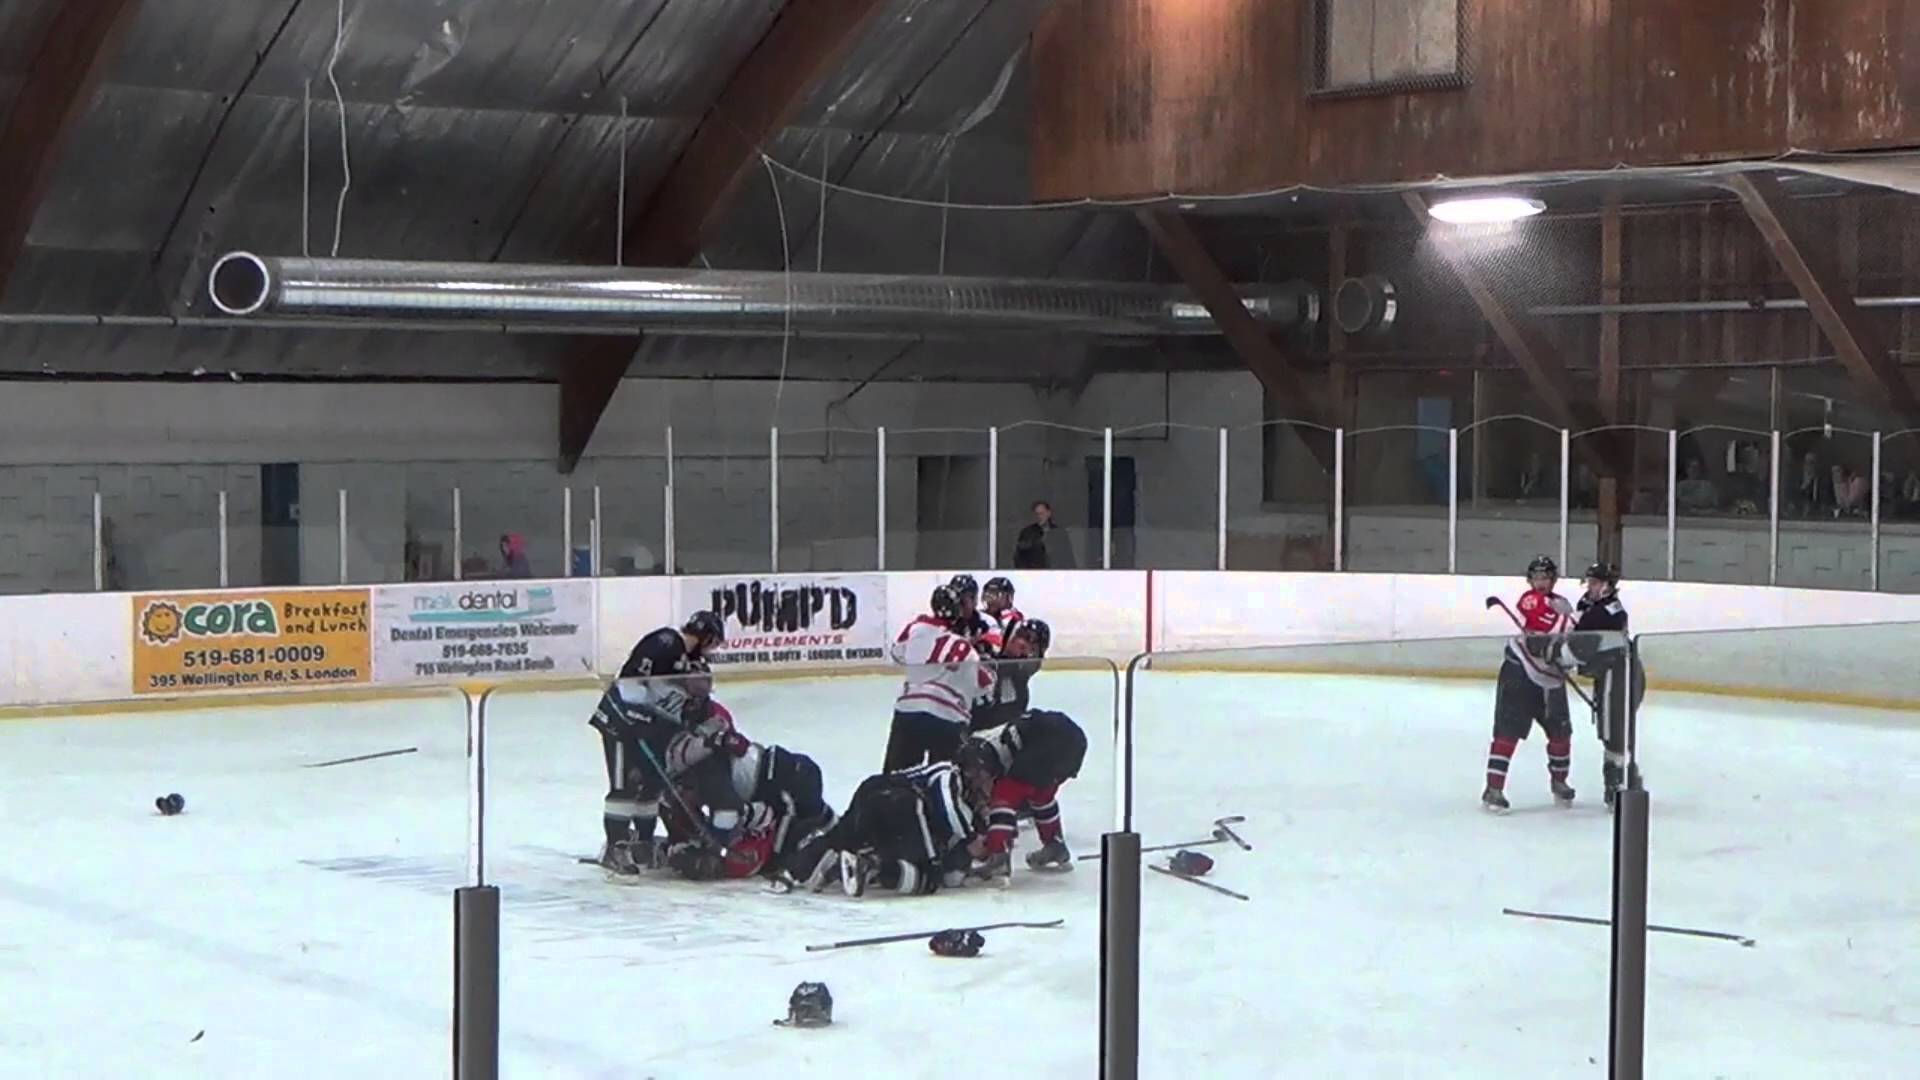 Massive hockey brawl breaks out involving players, refs & trainers